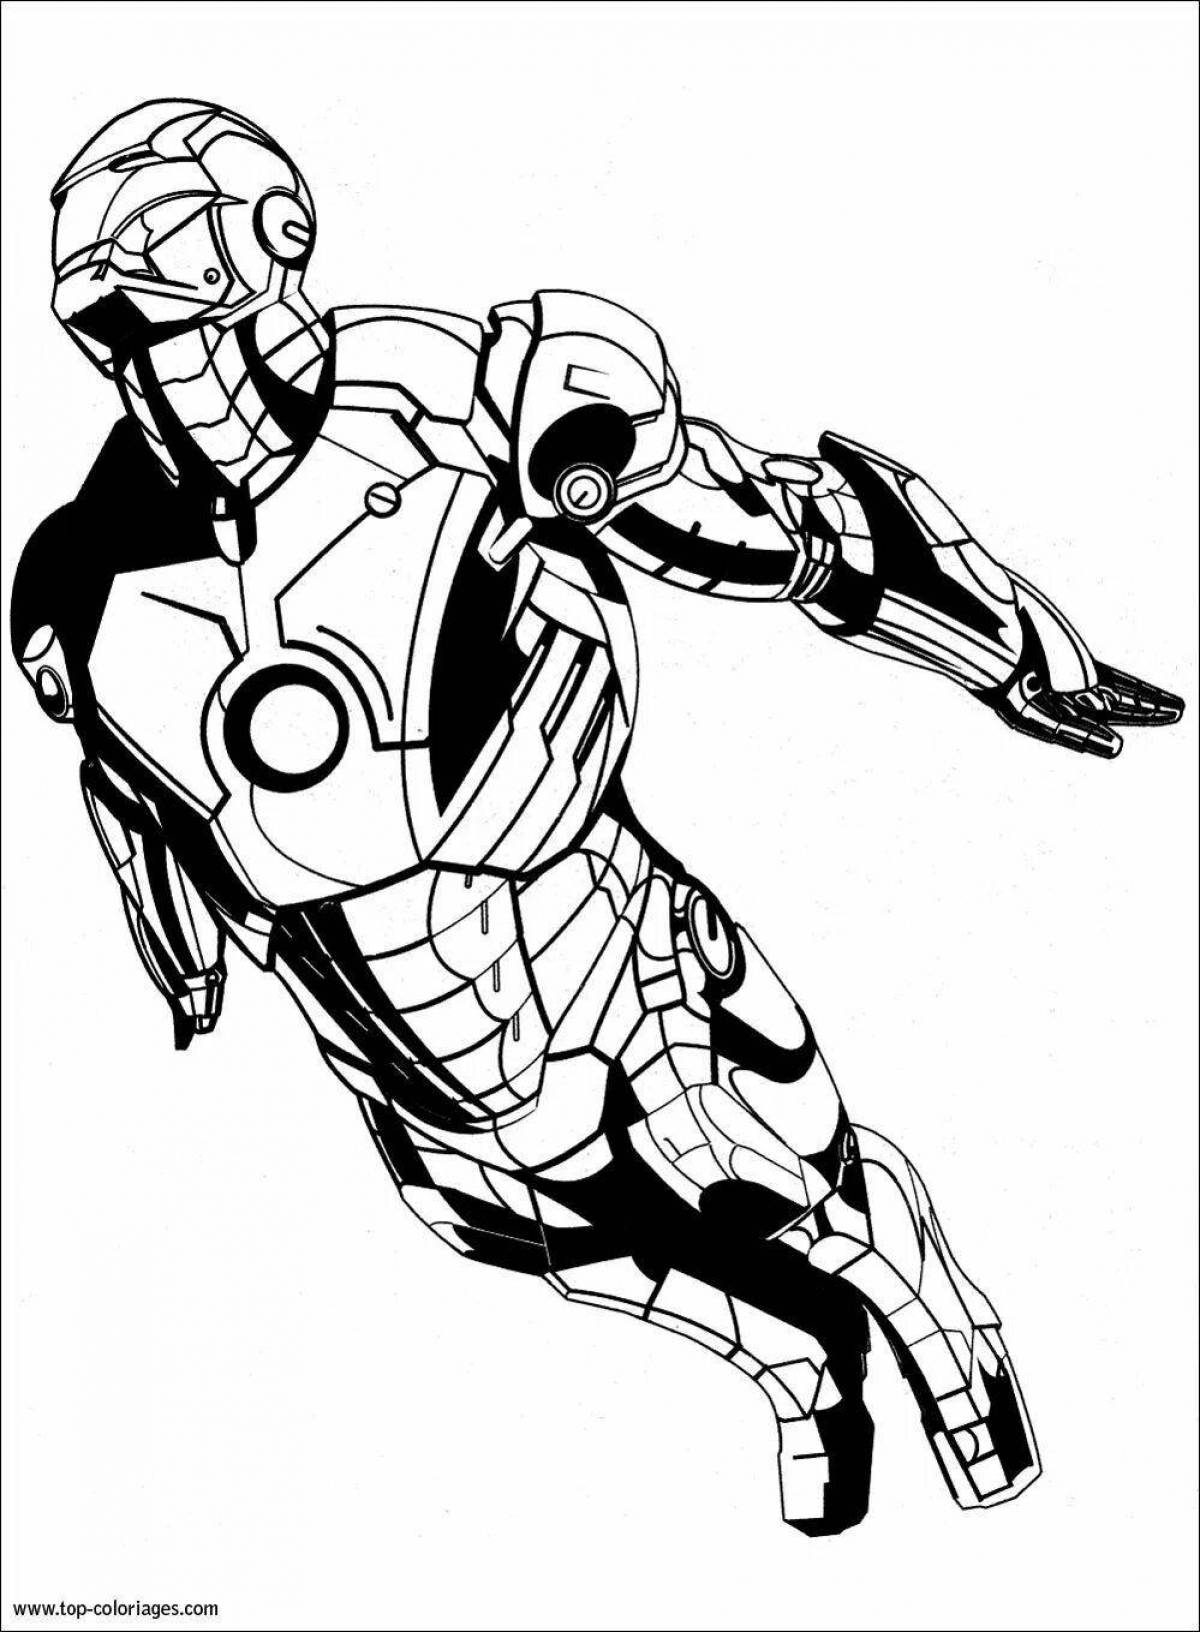 Grand coloring page iron man 50 marks